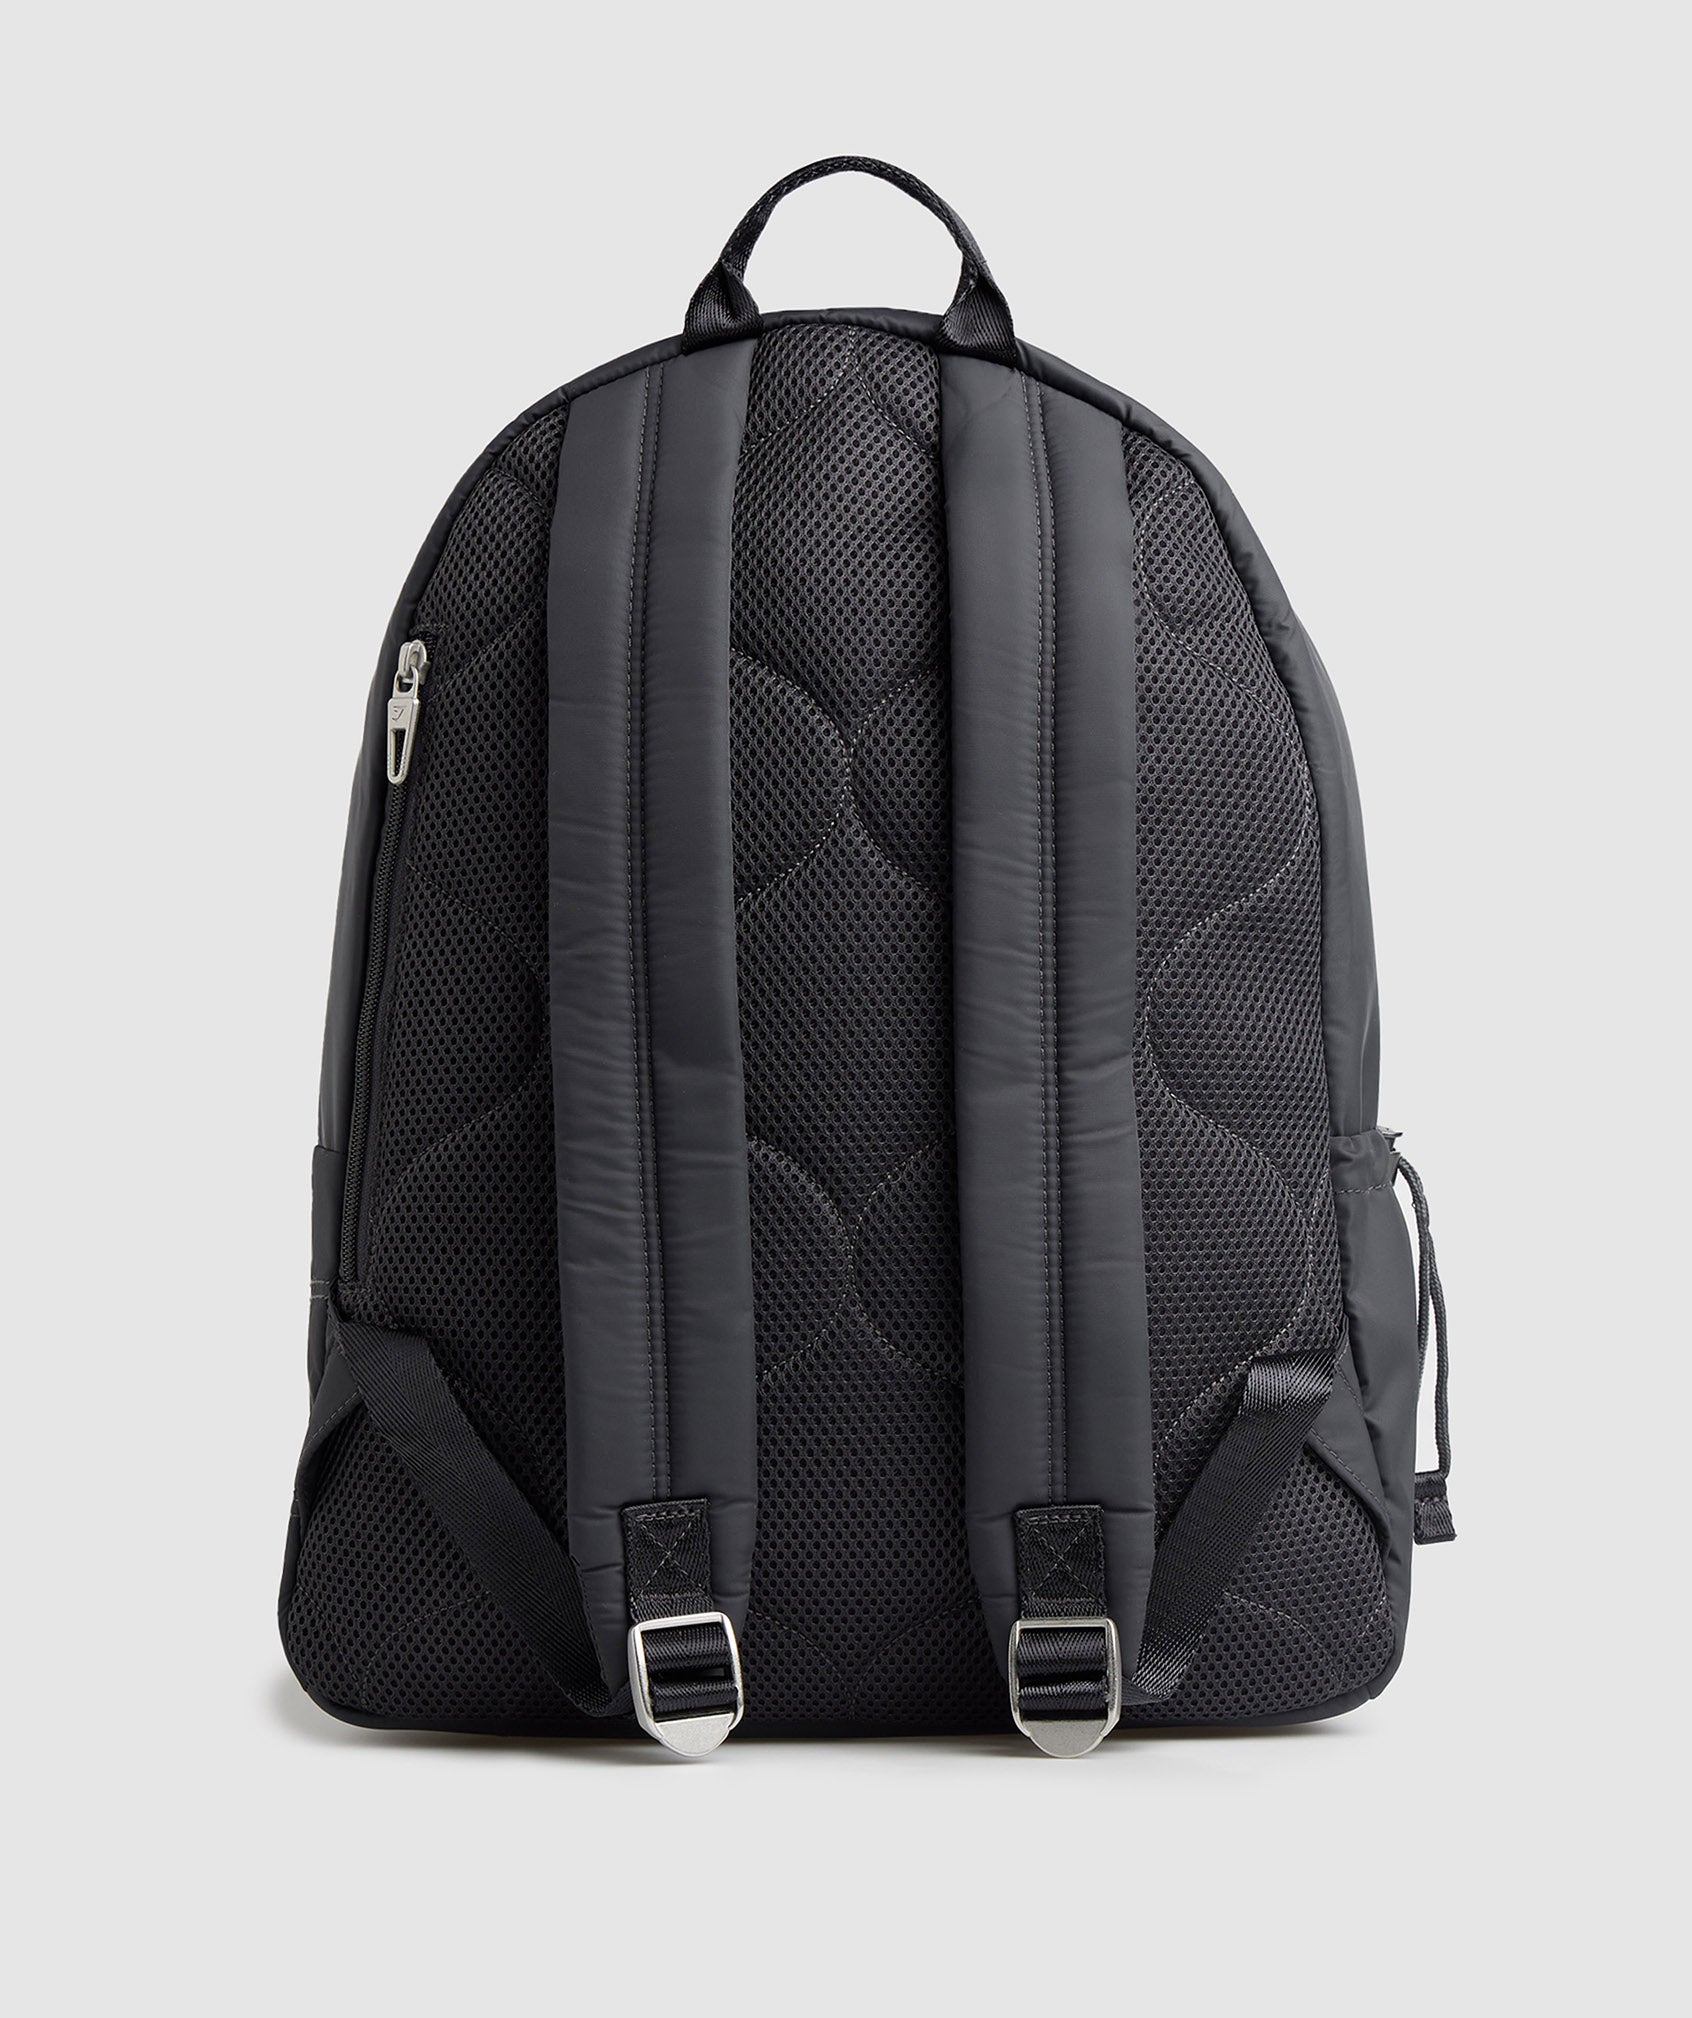 Premium Lifestyle Backpack in Onyx Grey - view 2